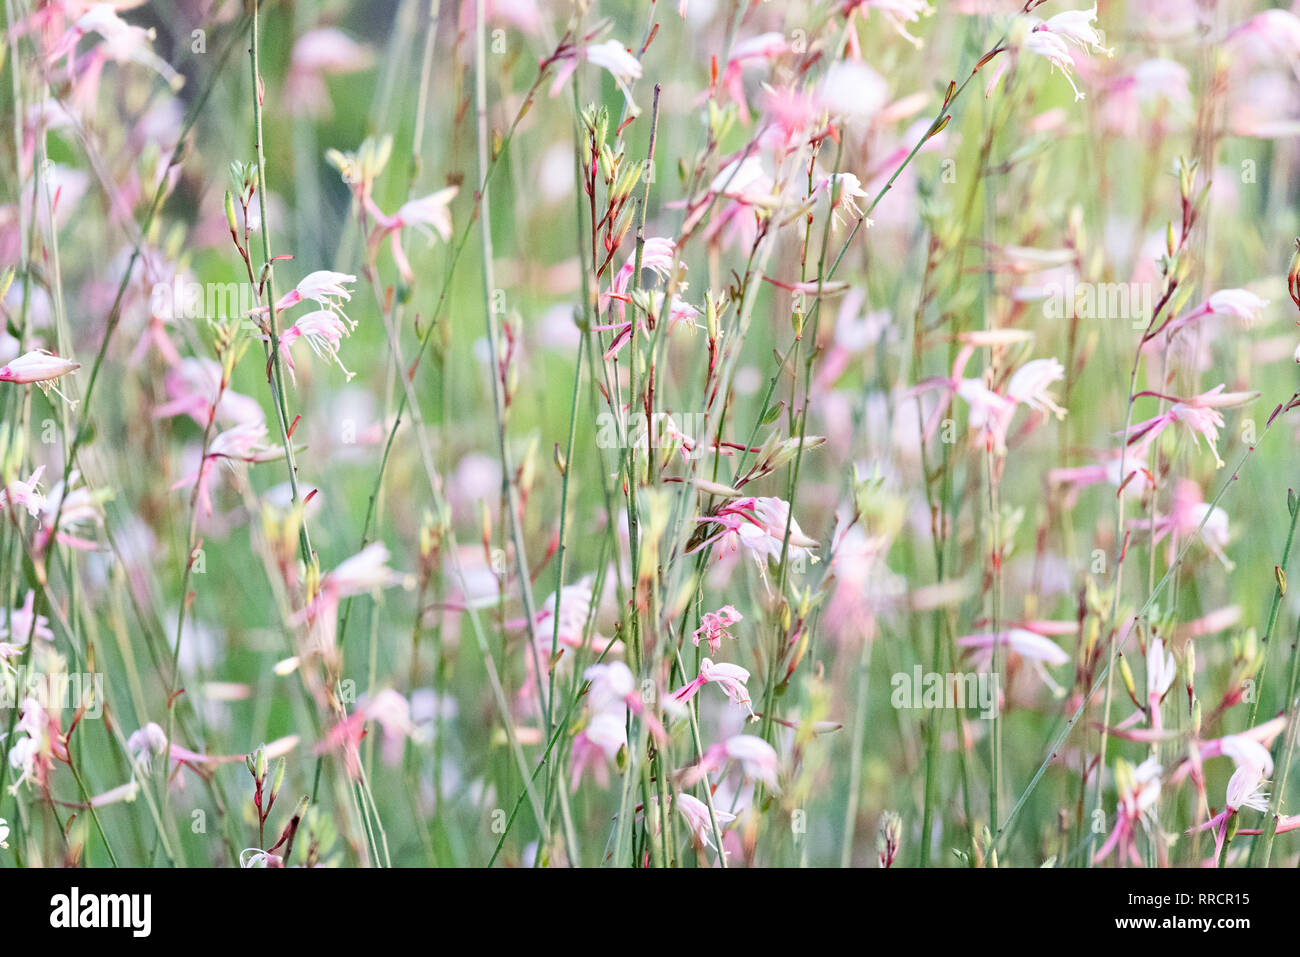 A Gaura Belleza bush with pink flowers moving in the breeze. Stock Photo